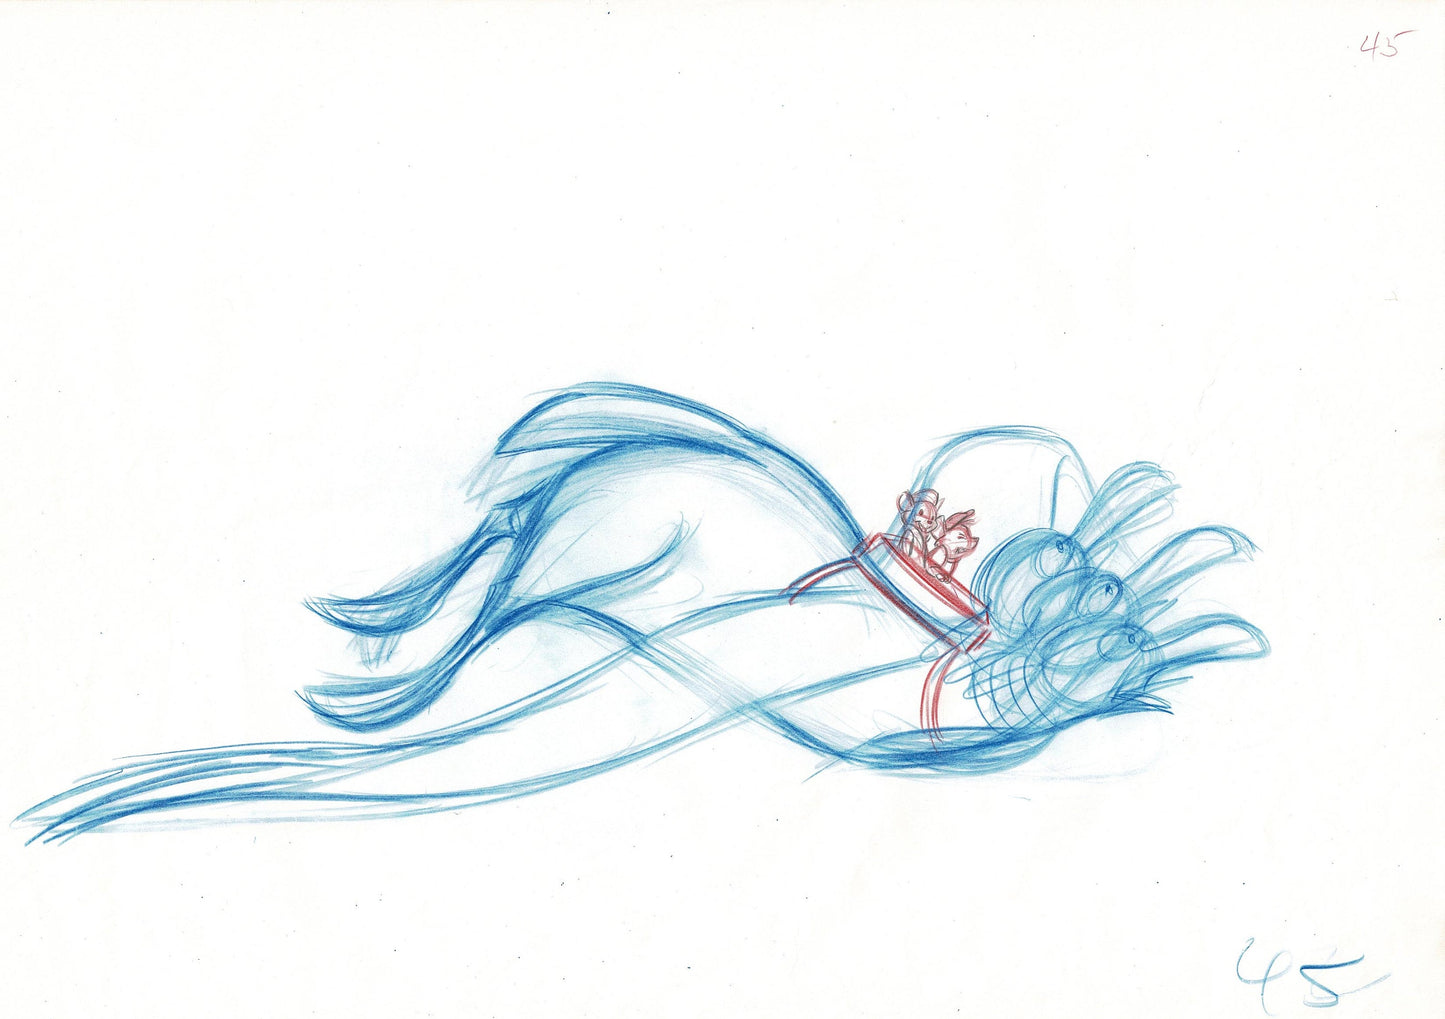 The Rescuers Down Under Wilber Bianca and Bernard 1990 Walt Disney Rough Production Drawing 45